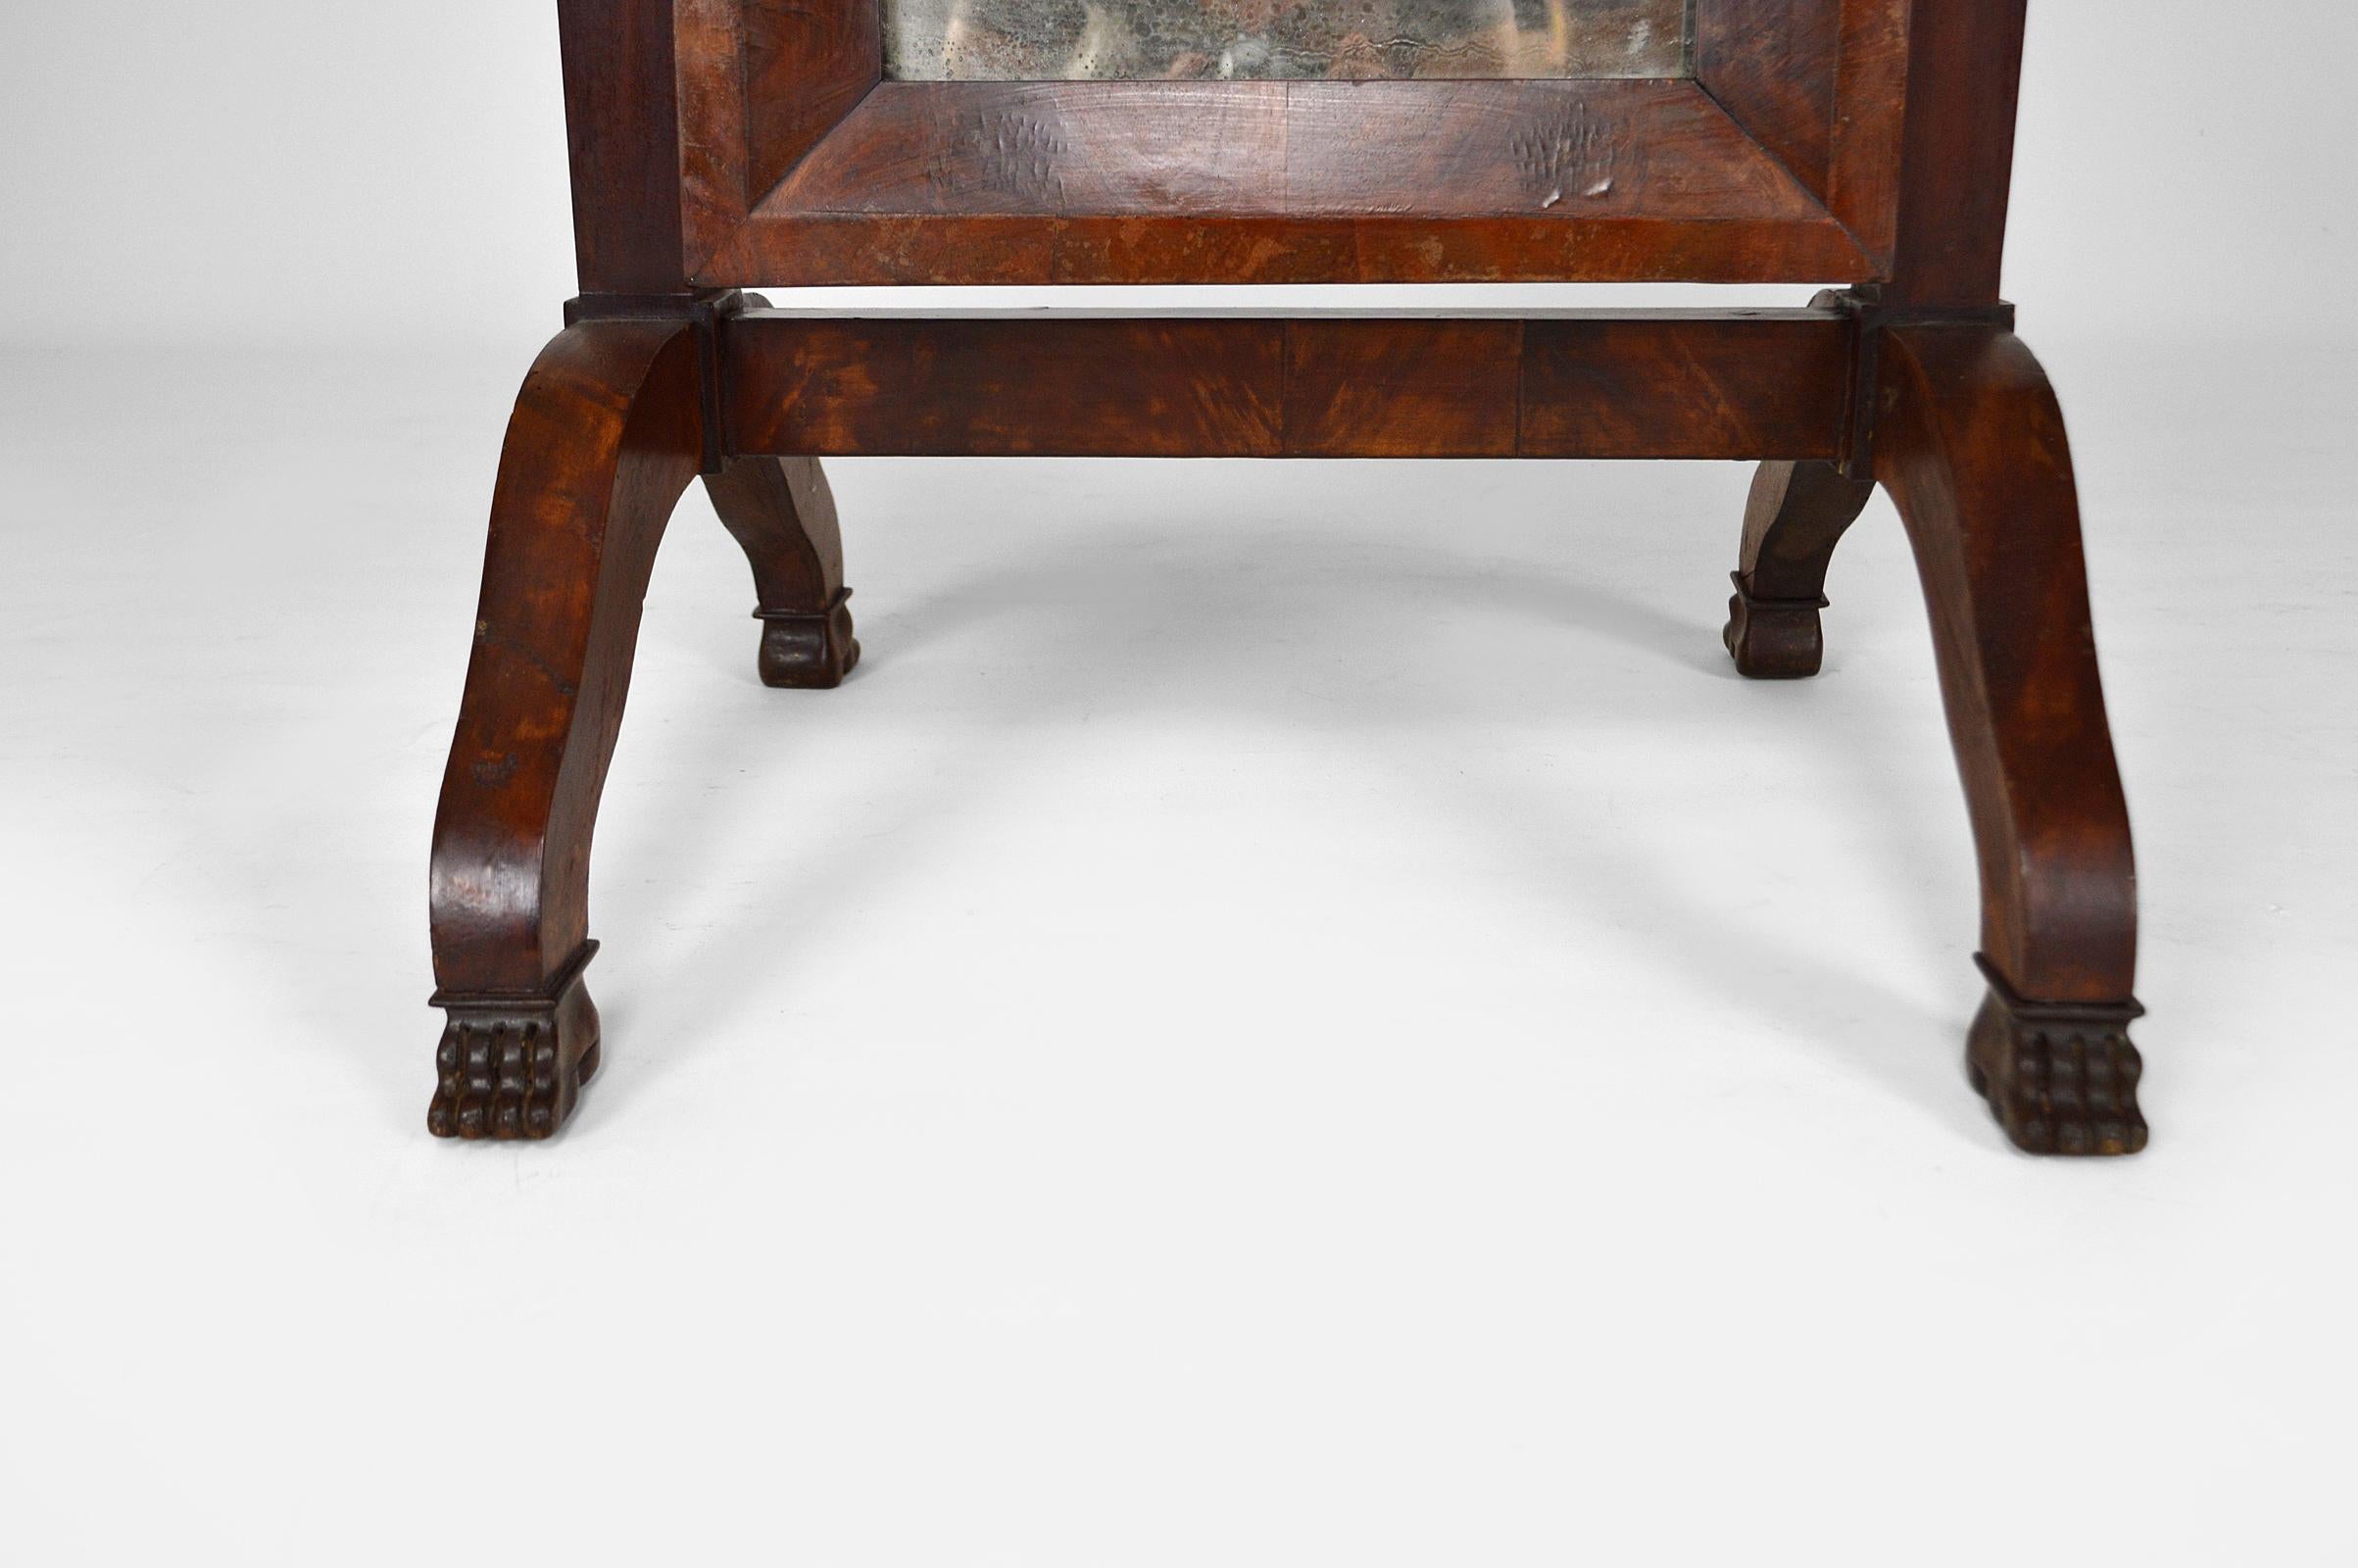 Empire Psyche Mirror in Mahogany, France, early 19th century For Sale 3